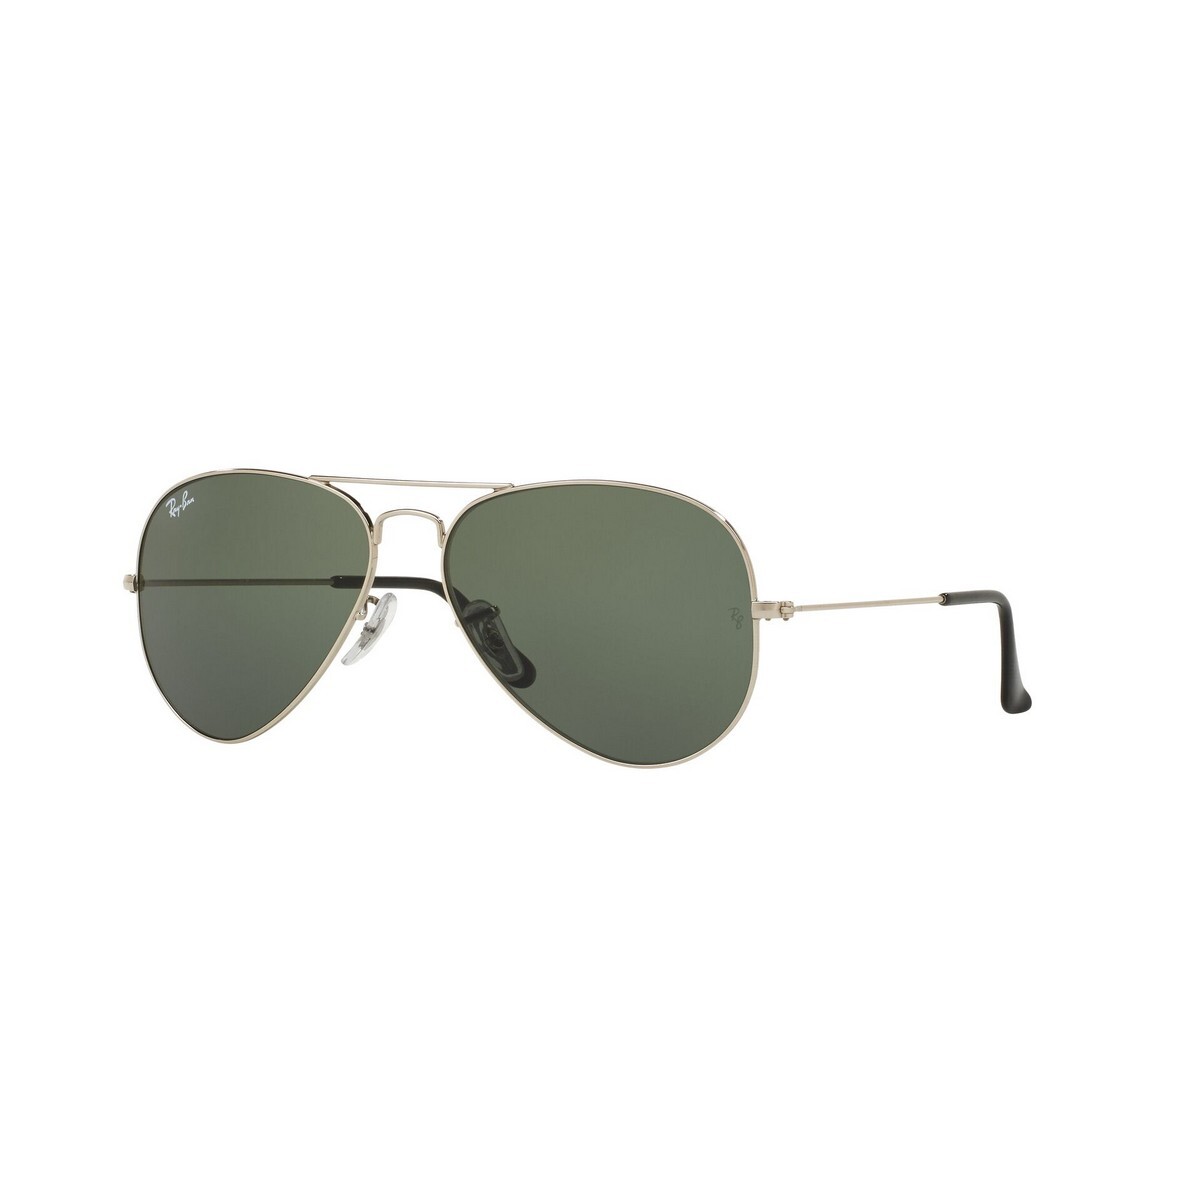 Rayban Unisex Silver Frame With Crystal Green Lens Sunglass